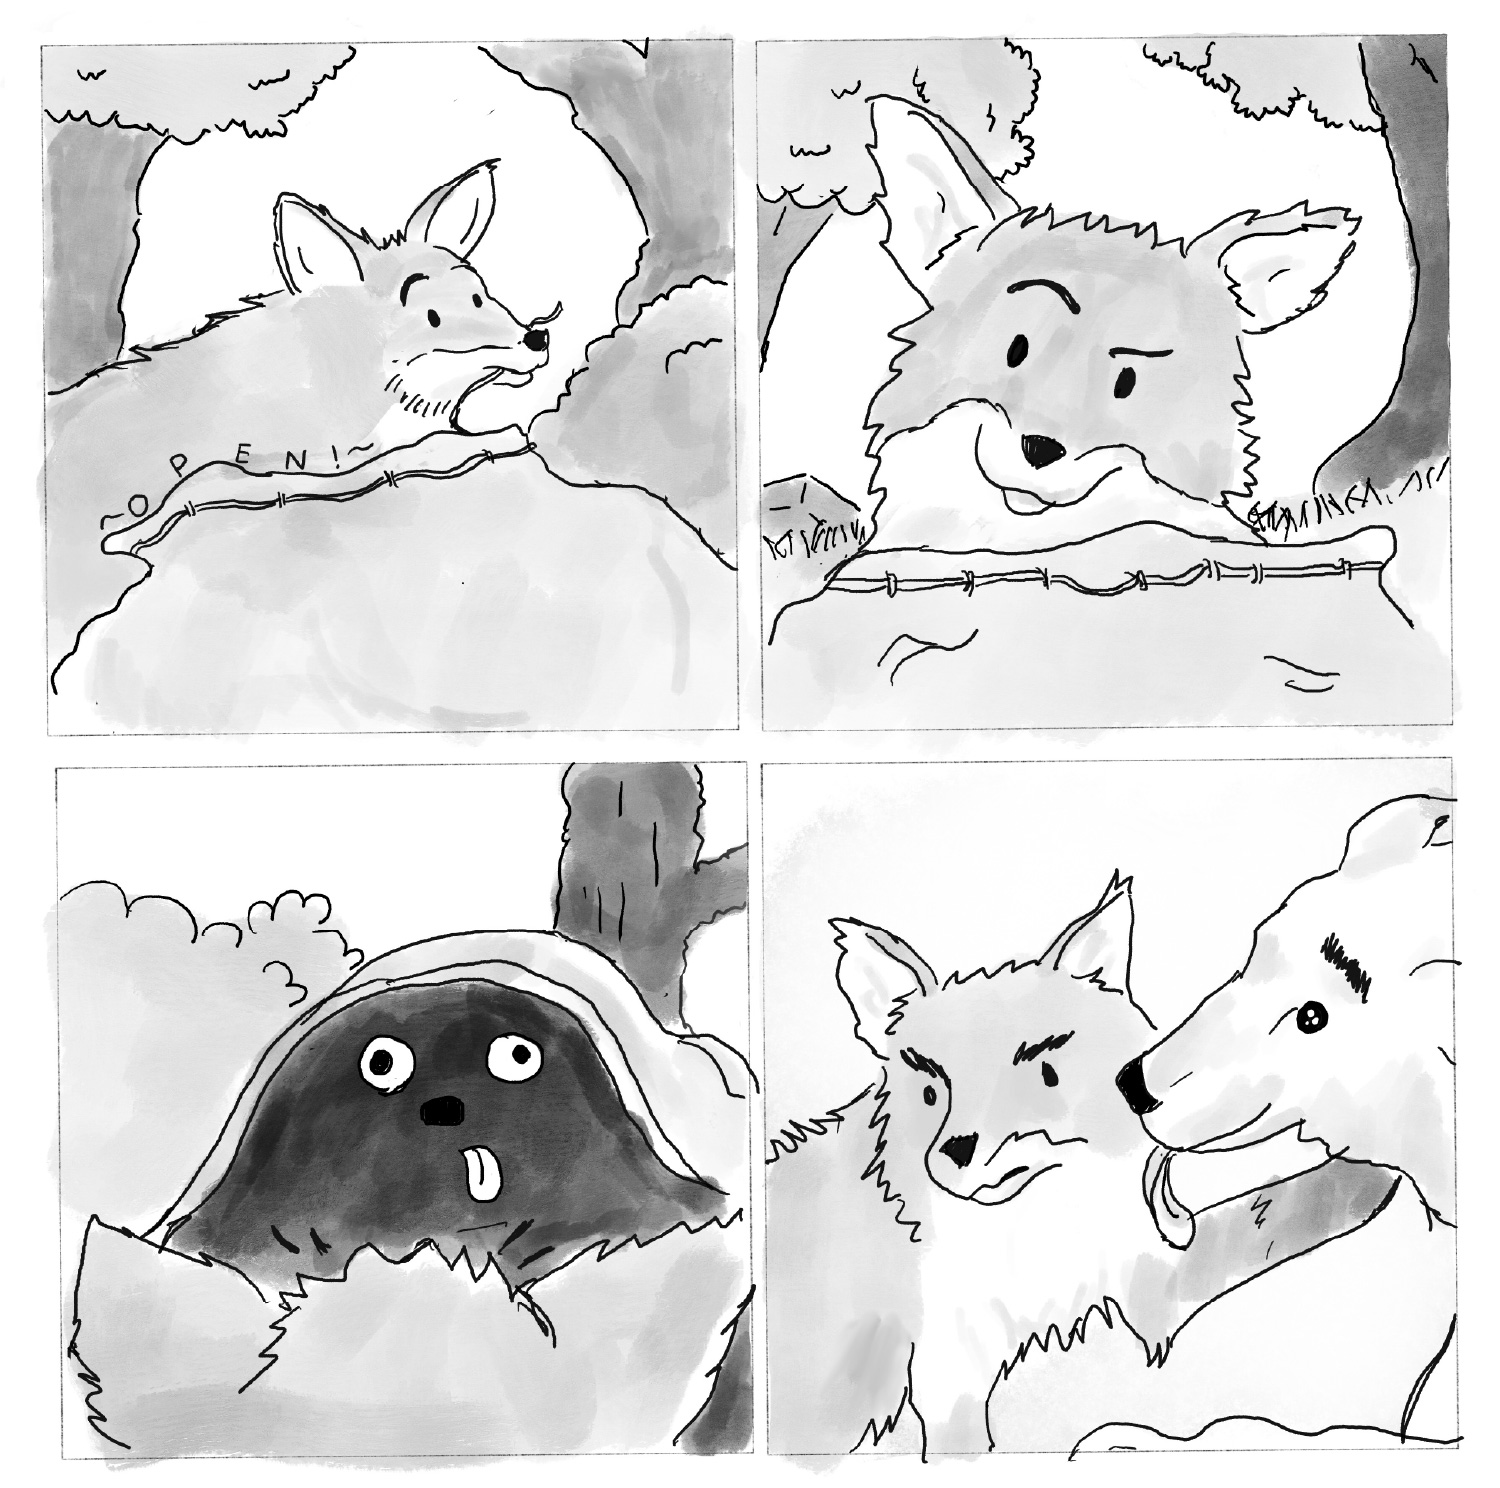 A comic detailing an alternate ending for the first story. In the first panel, a fox opens a bag. Second, he looks in it curiously. Third, eyes stare back at him from the darkness. Fourth, a dog is licking the annoyed fox.